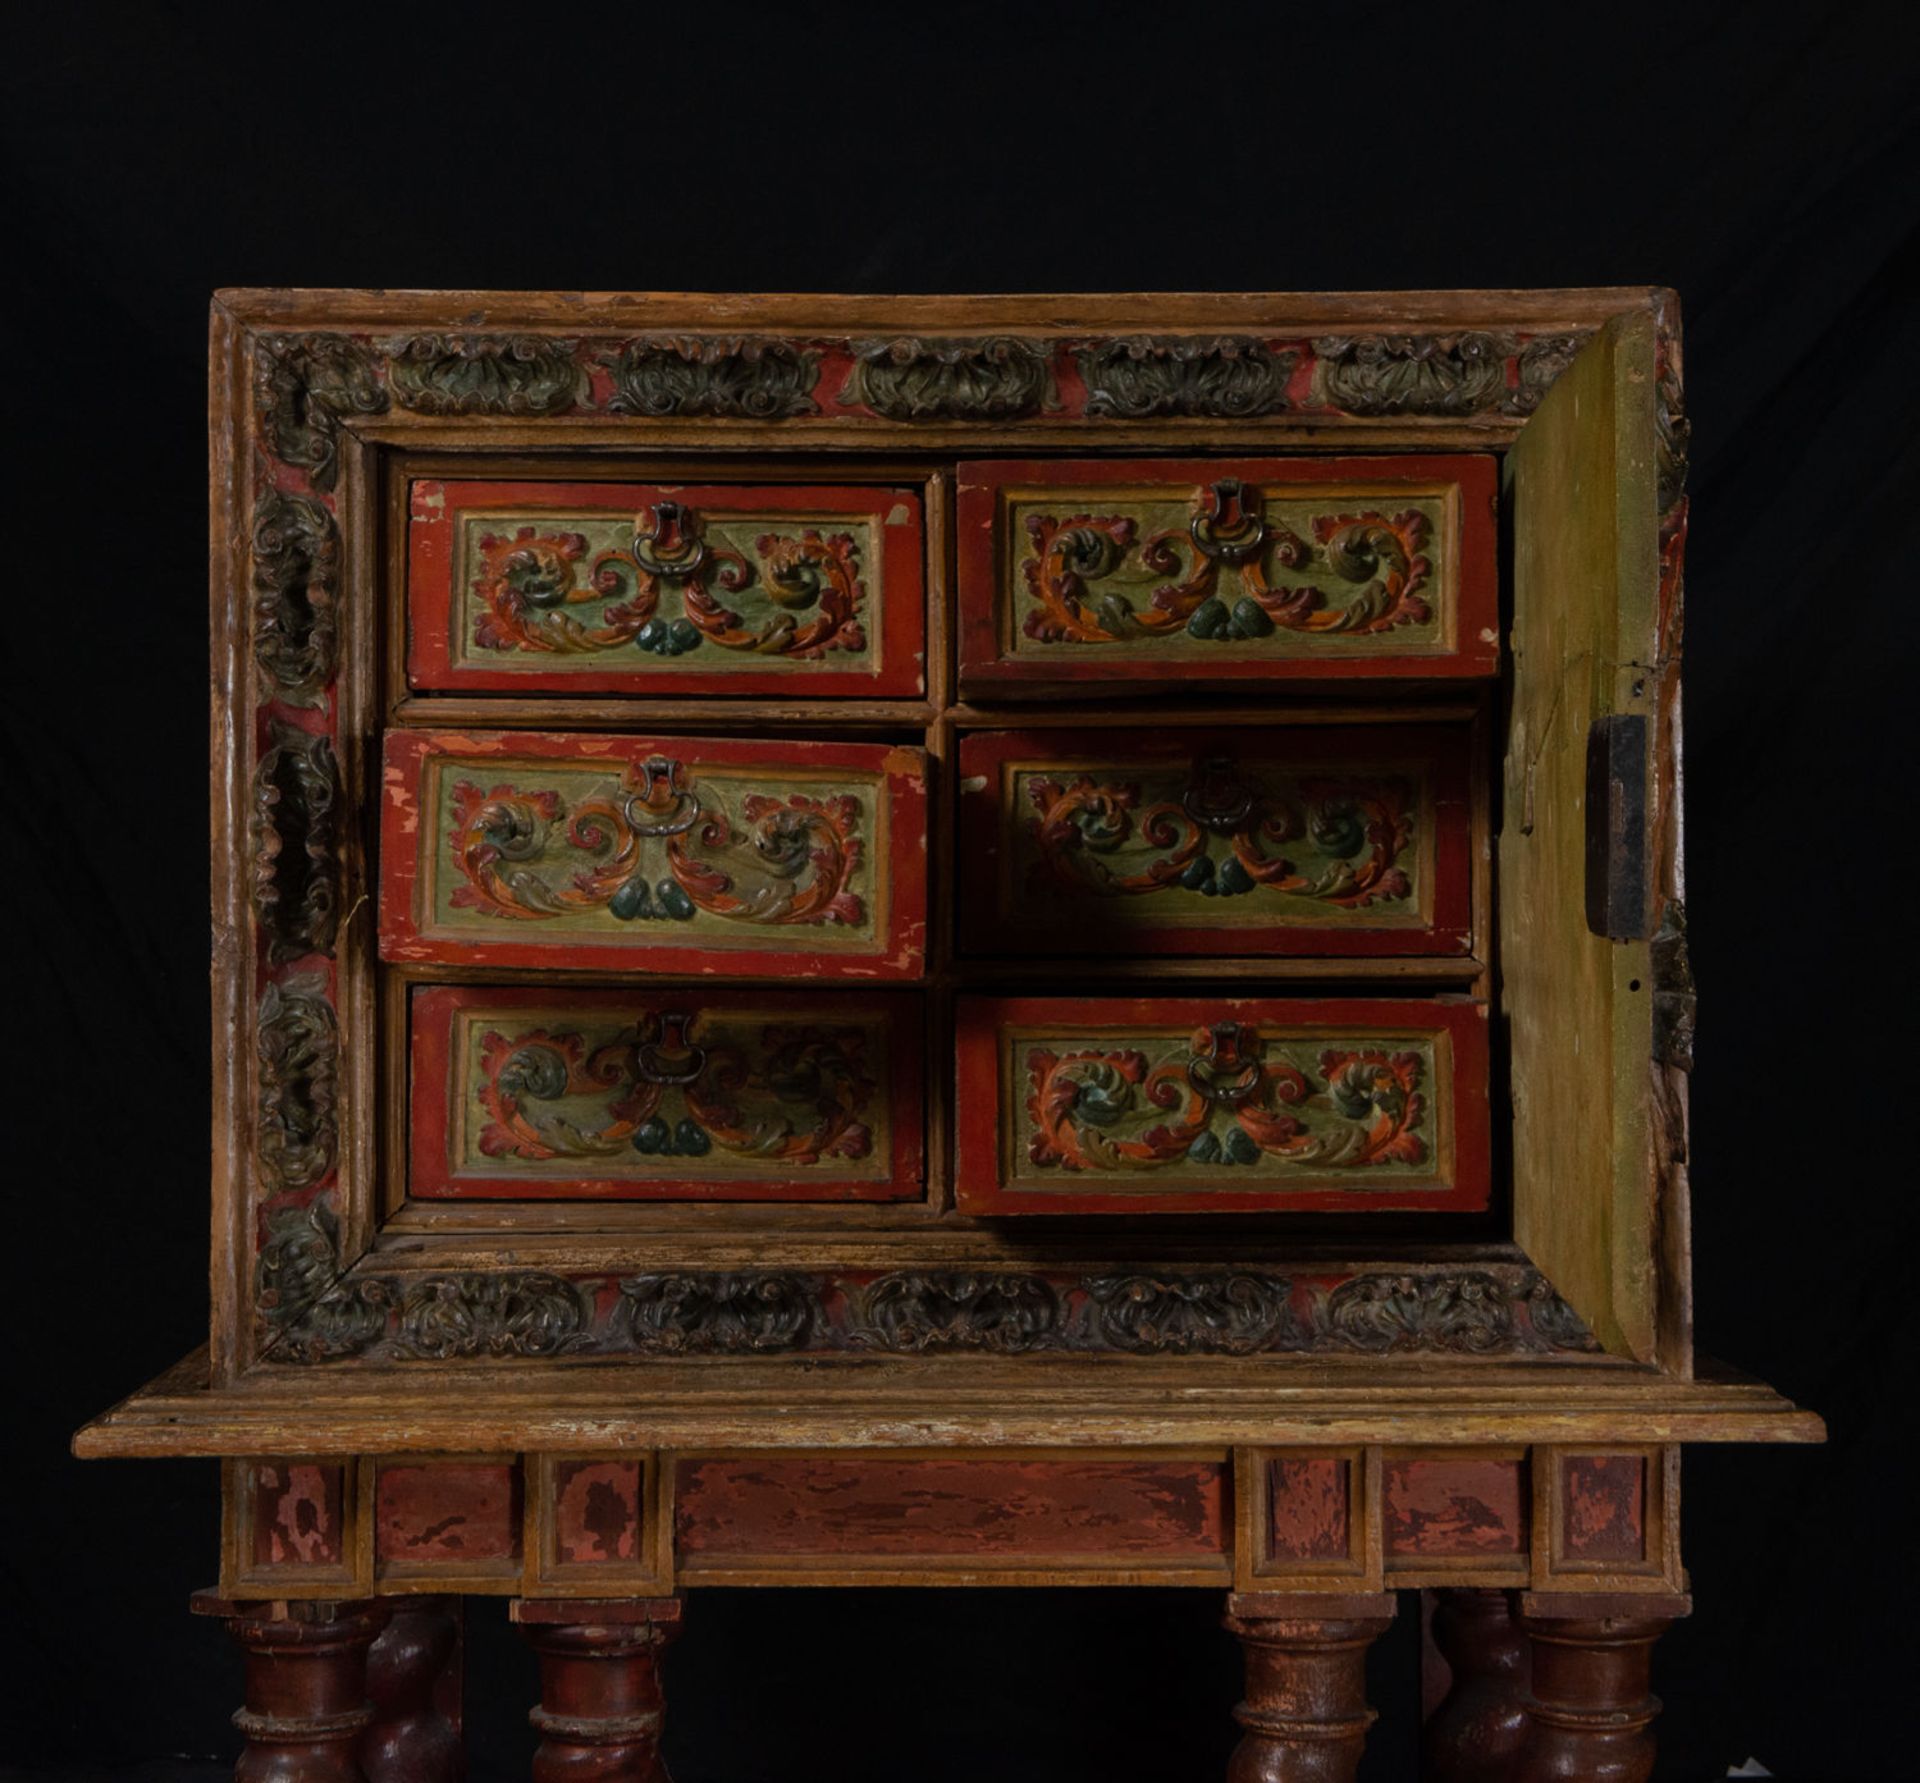 Important Mexican Colonial Cabinet in Polychrome Wood, New Spanish work from the 17th - 18th century - Bild 7 aus 9